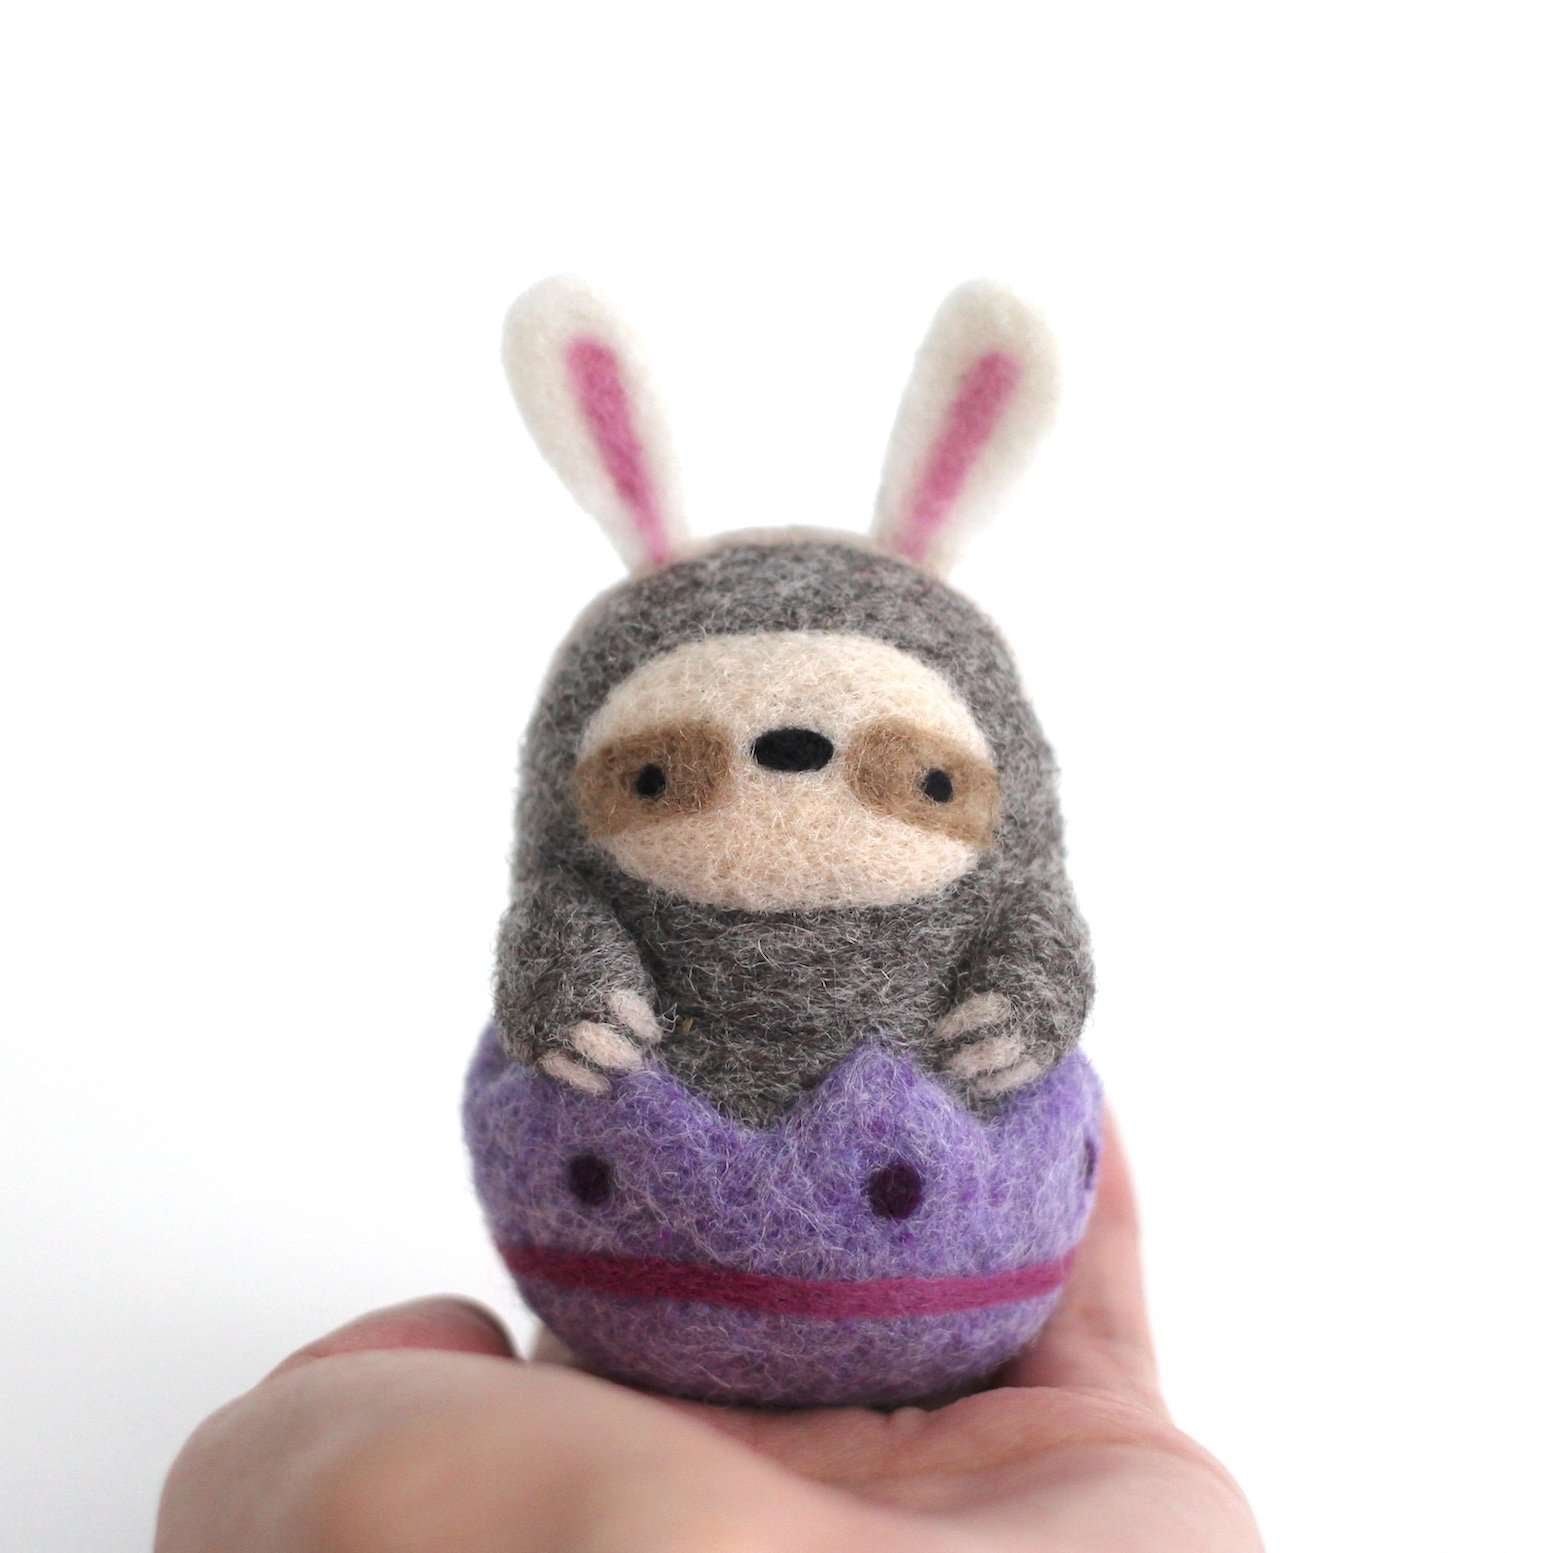 Needle Felted Easter Sloth Bunny by Wild Whimsy Woolies